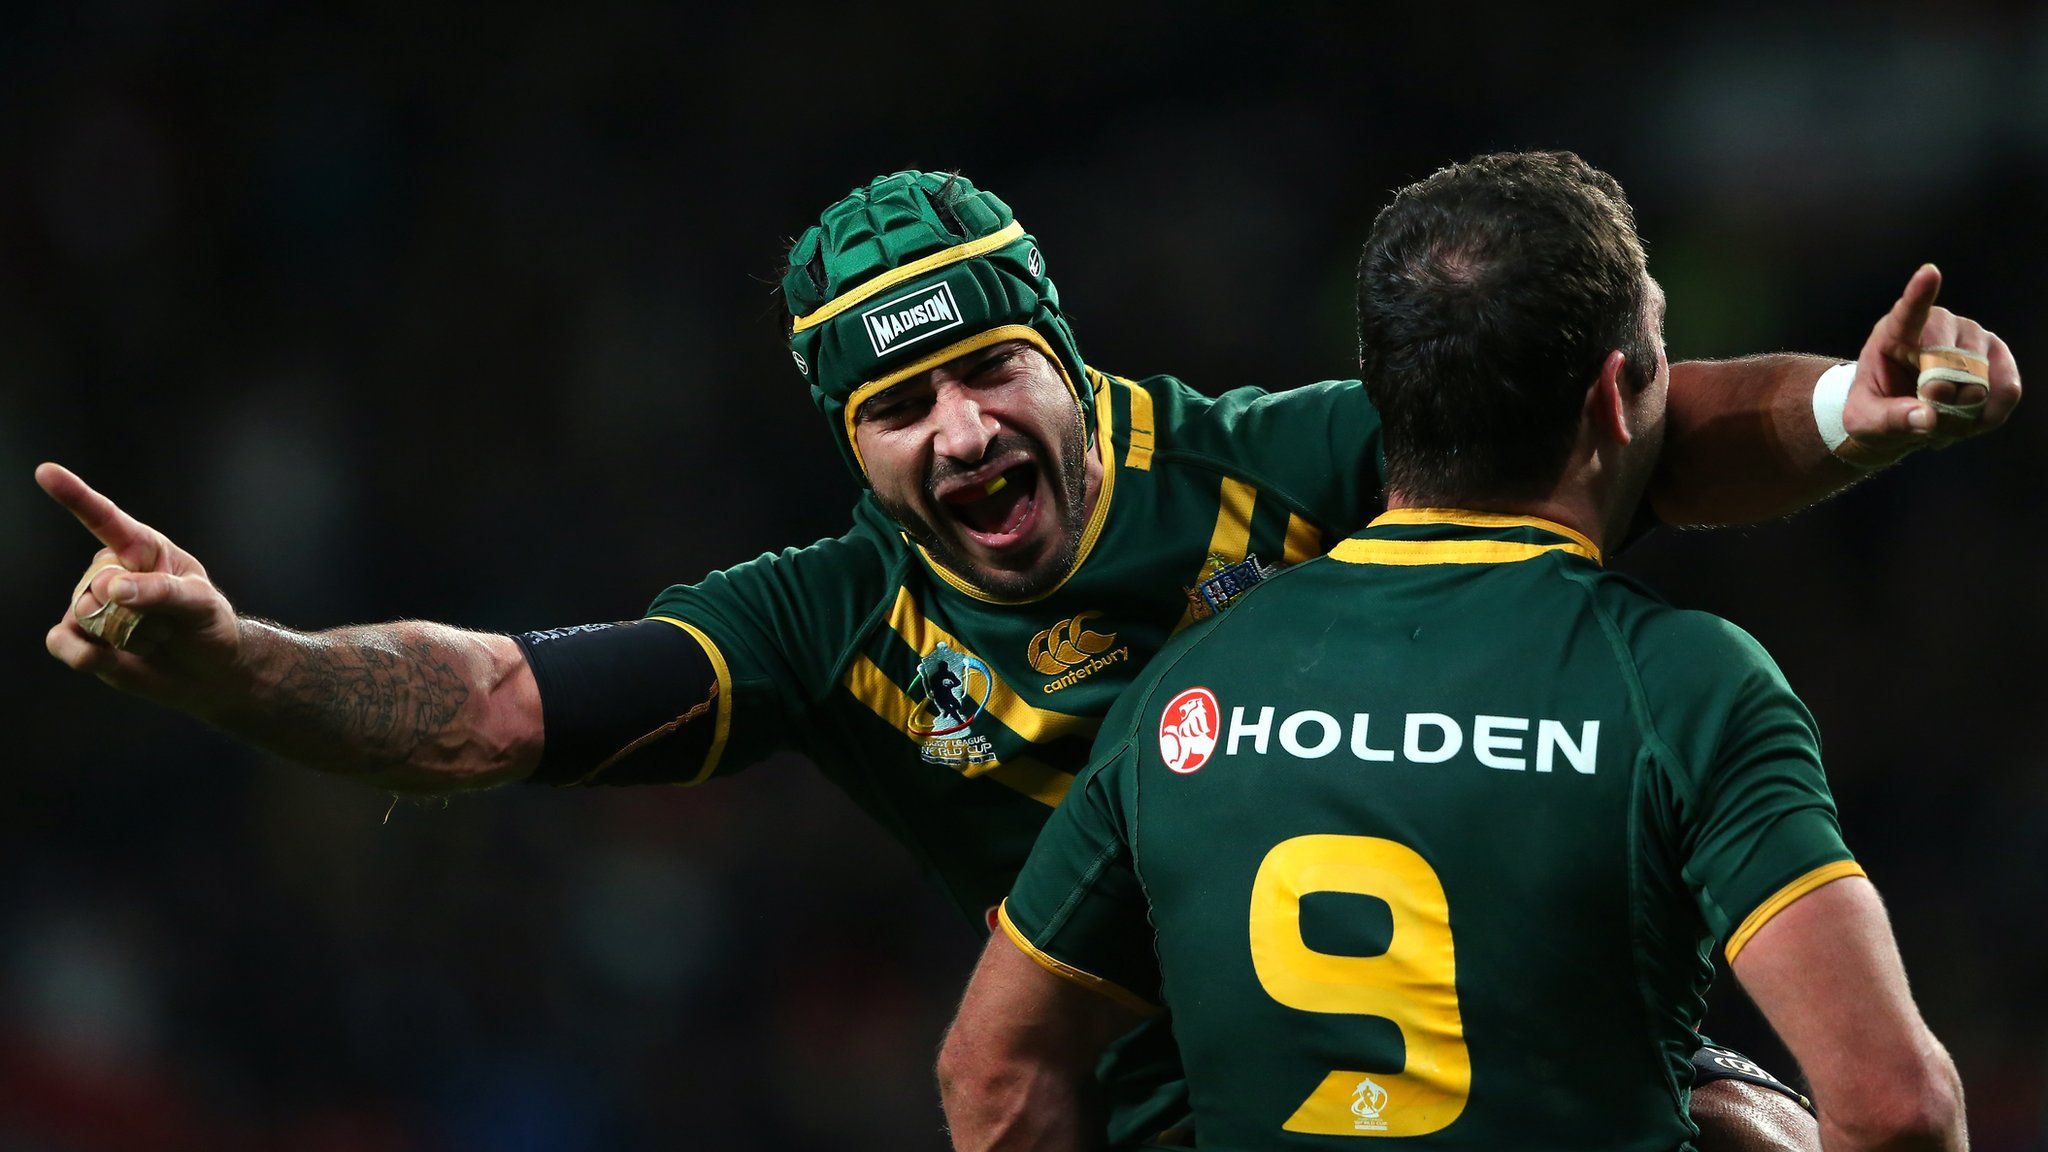 Johnathan Thurston and Cameron Smith of Australia celebrate after victory over New Zealand in the Rugby League World Cup Final between New Zealand and Australia at Old Trafford on November 30, 2013 in Manchester, England